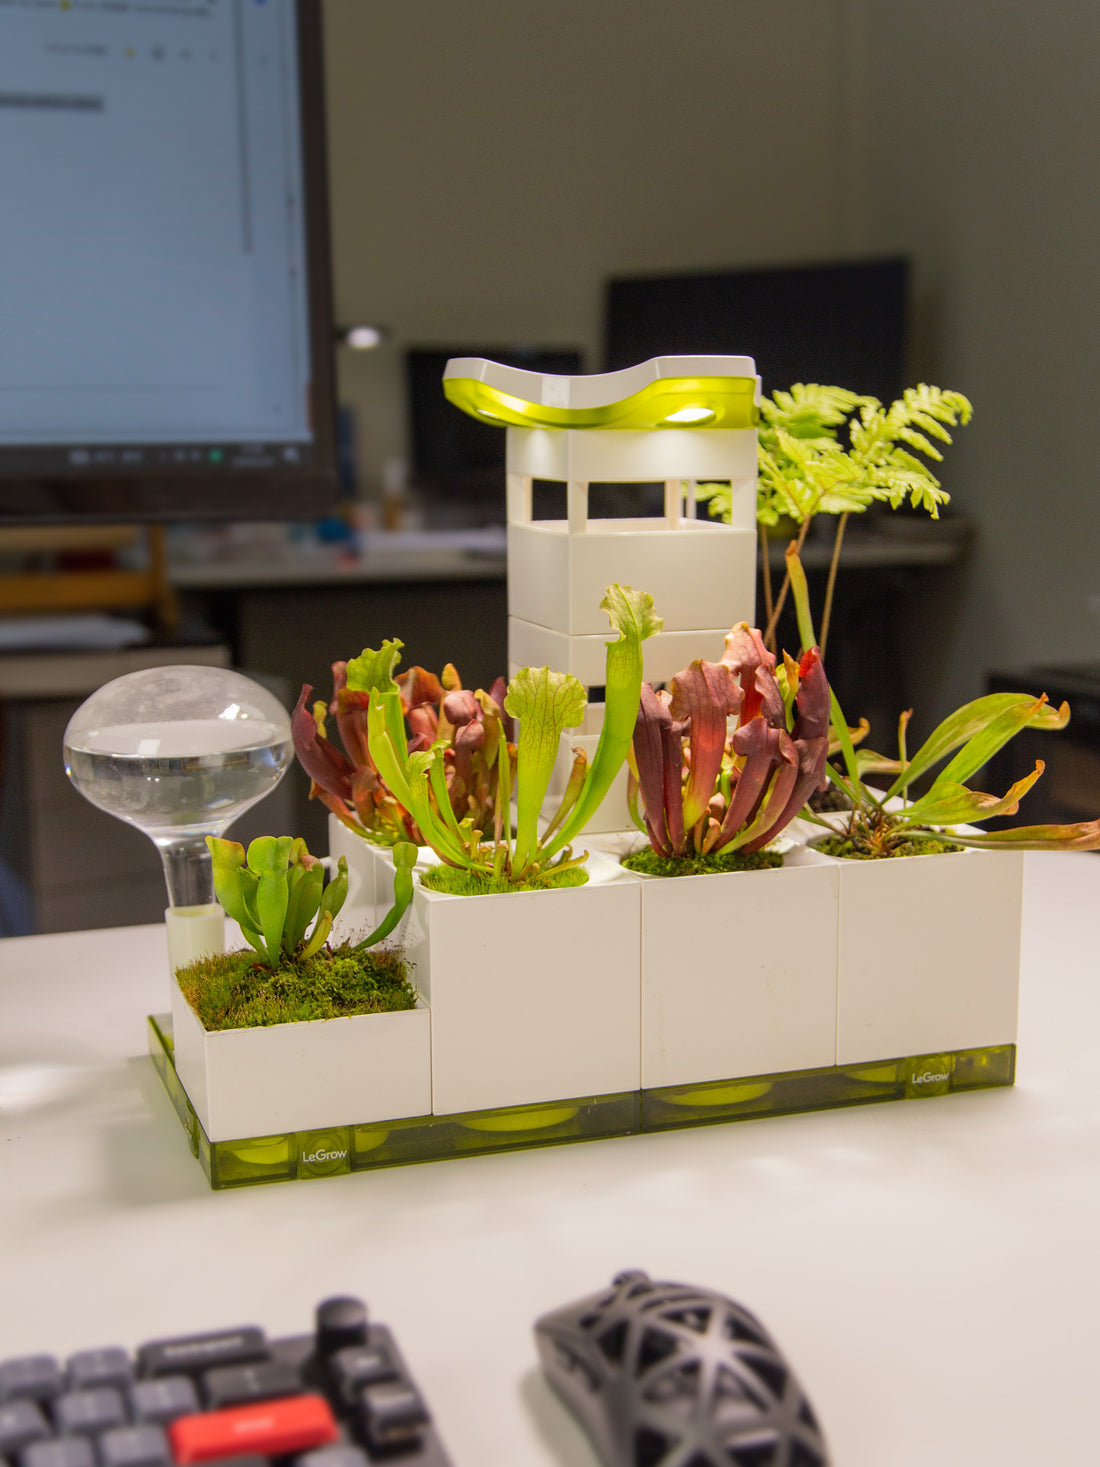 LeGrow100 project will design new combinations using existing LeGrow components or create new accessories for carnivorous. Sarracenia, sundew, VFT(Venus flytrap), Dionaea, nepenthes, Pinguicula ,Utricularia